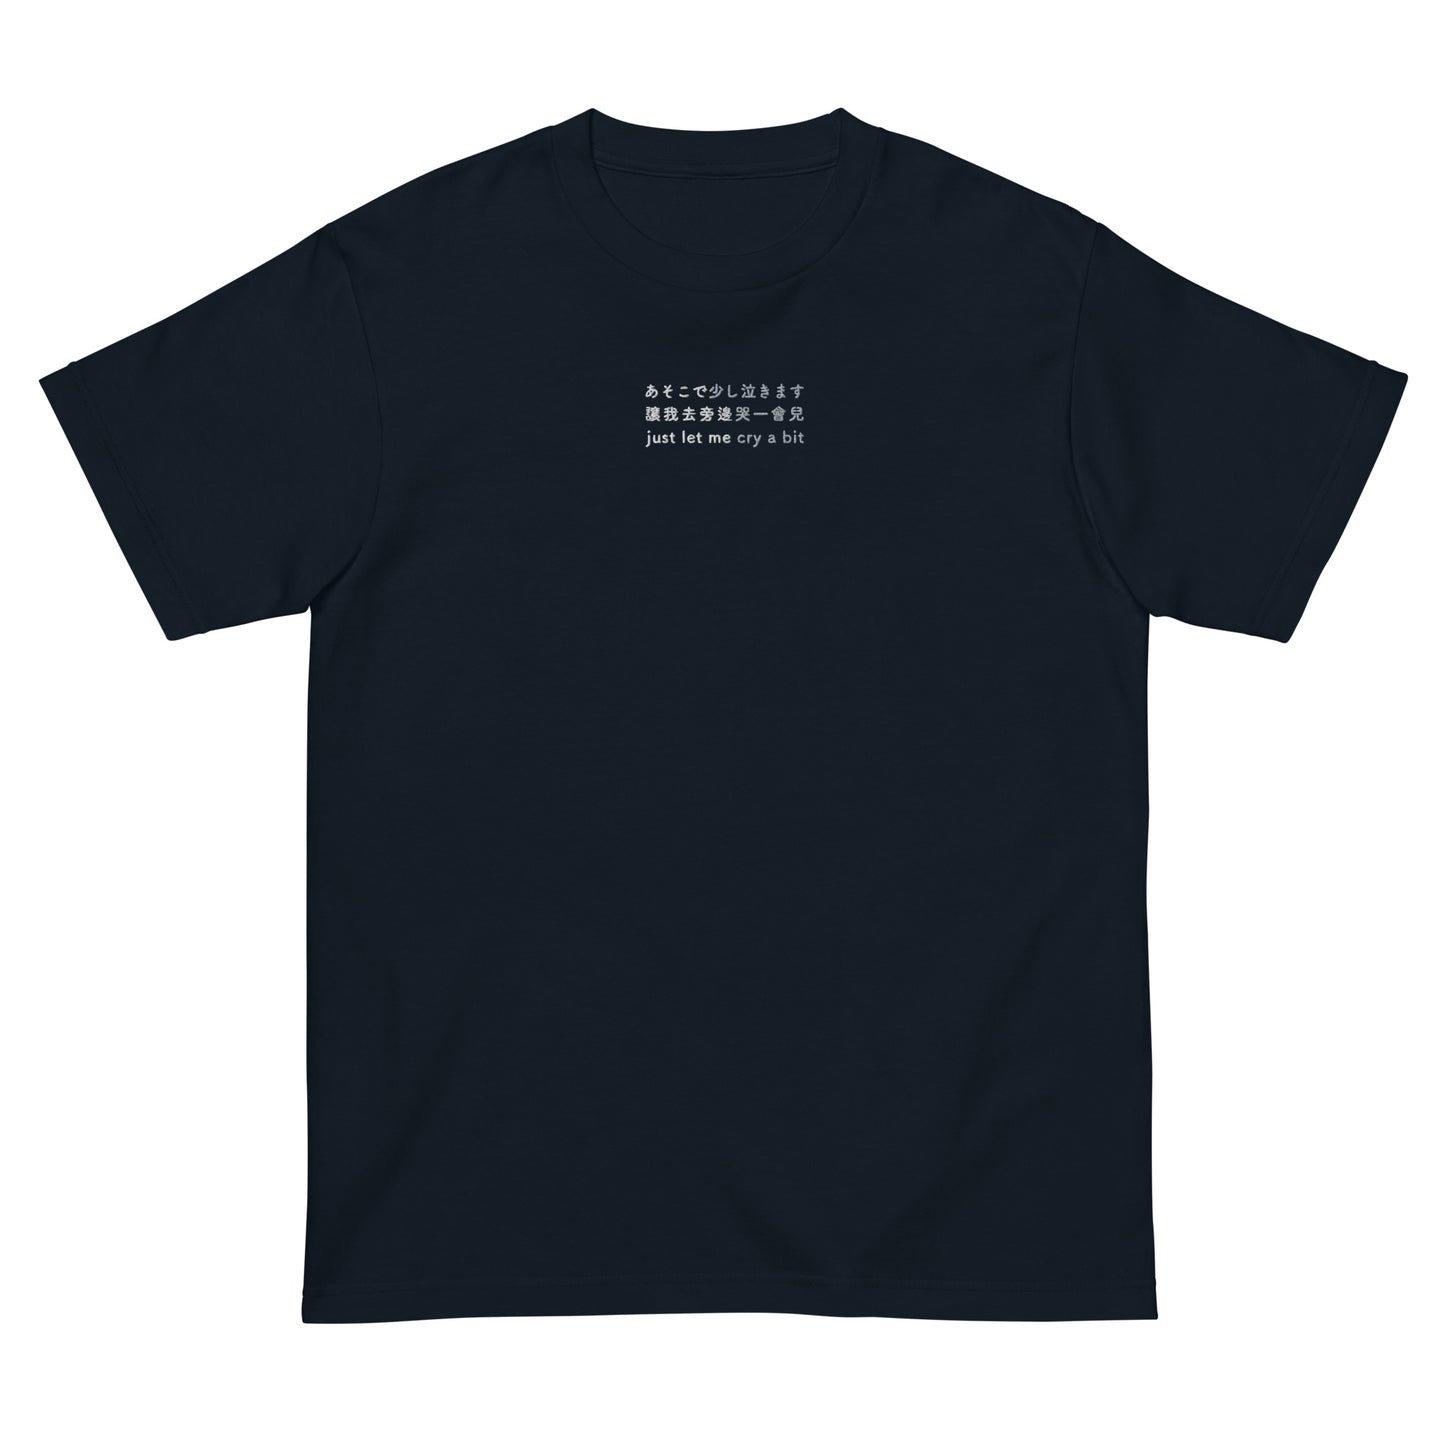 Navy High Quality Tee - Front Design with an White,Light Gray Embroidery "Just Let Me Cry A Bit" in Japanese,Chinese and English